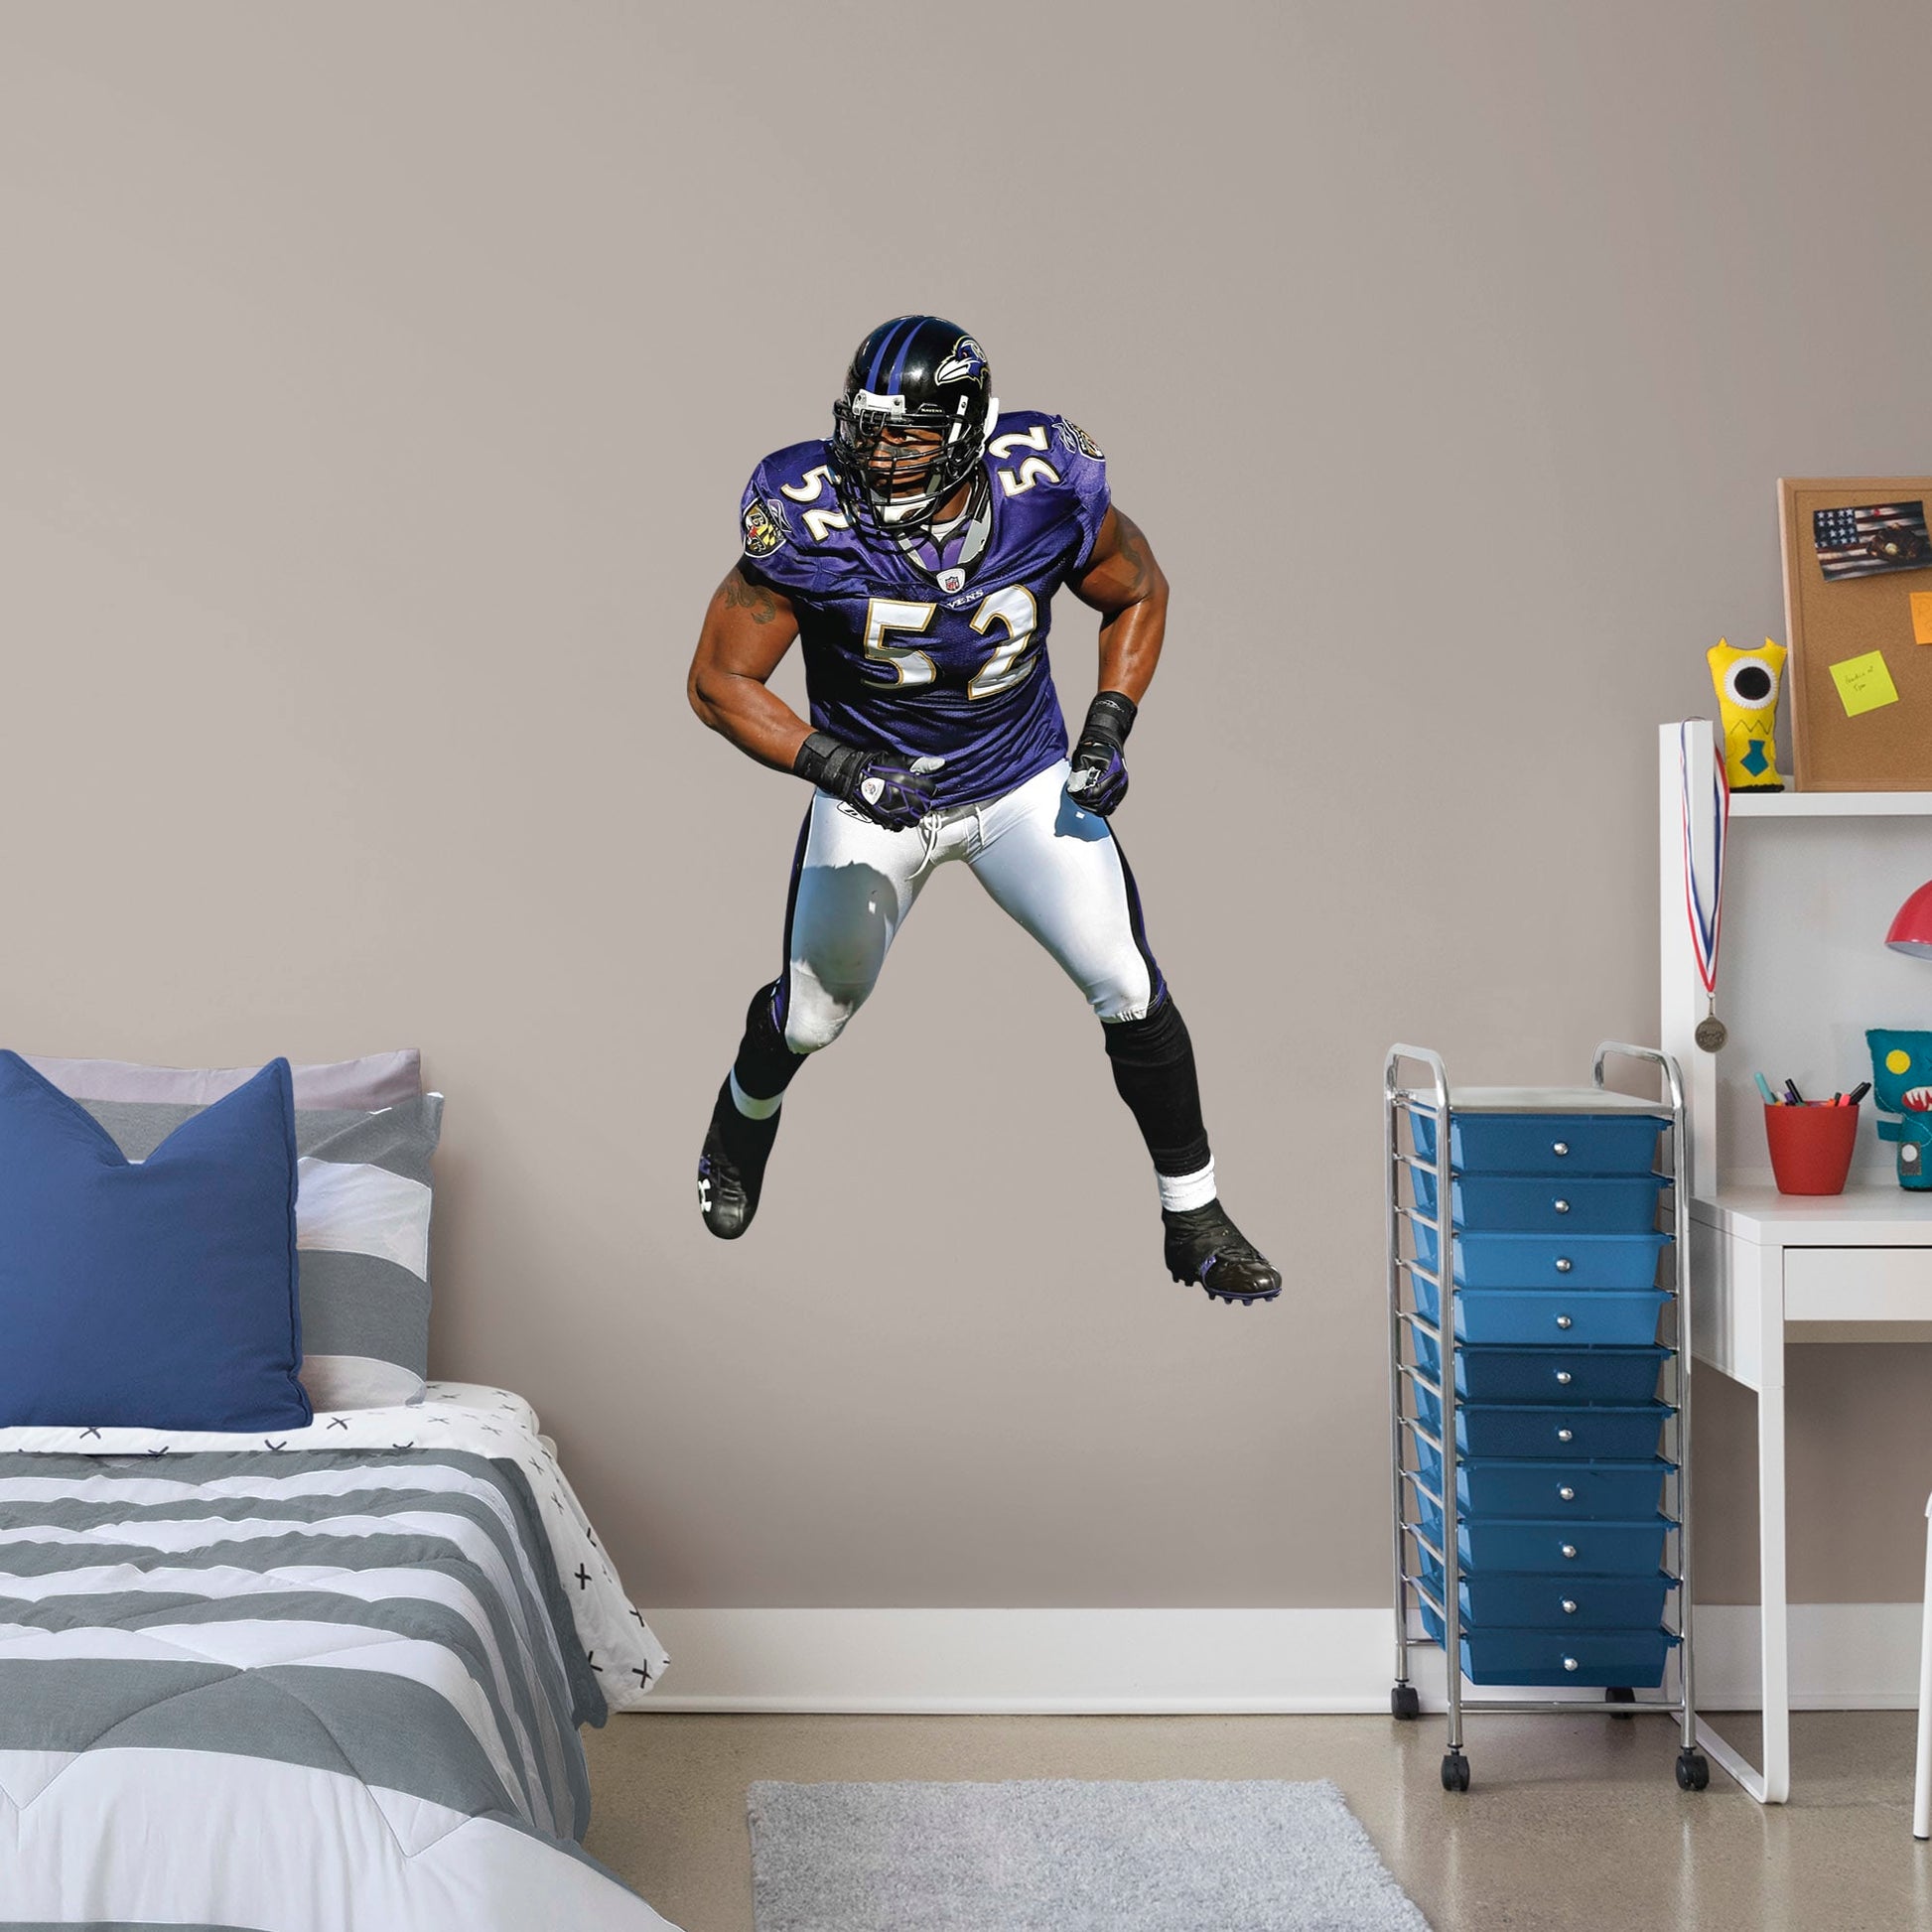 Giant Athlete + 2 Decals (31"W x 51"H) He’s the second linebacker ever to win the NFL’s Super Bowl MVP Award, and now, Brickwall, a.k.a. Ray Lewis, is ready for the bedroom, living room or locker room. This rugged, removable wall decal features the full figure of two-time Super Bowl champion No. 52 in his black, purple and metallic gold Baltimore Ravens best. Go Ravens!